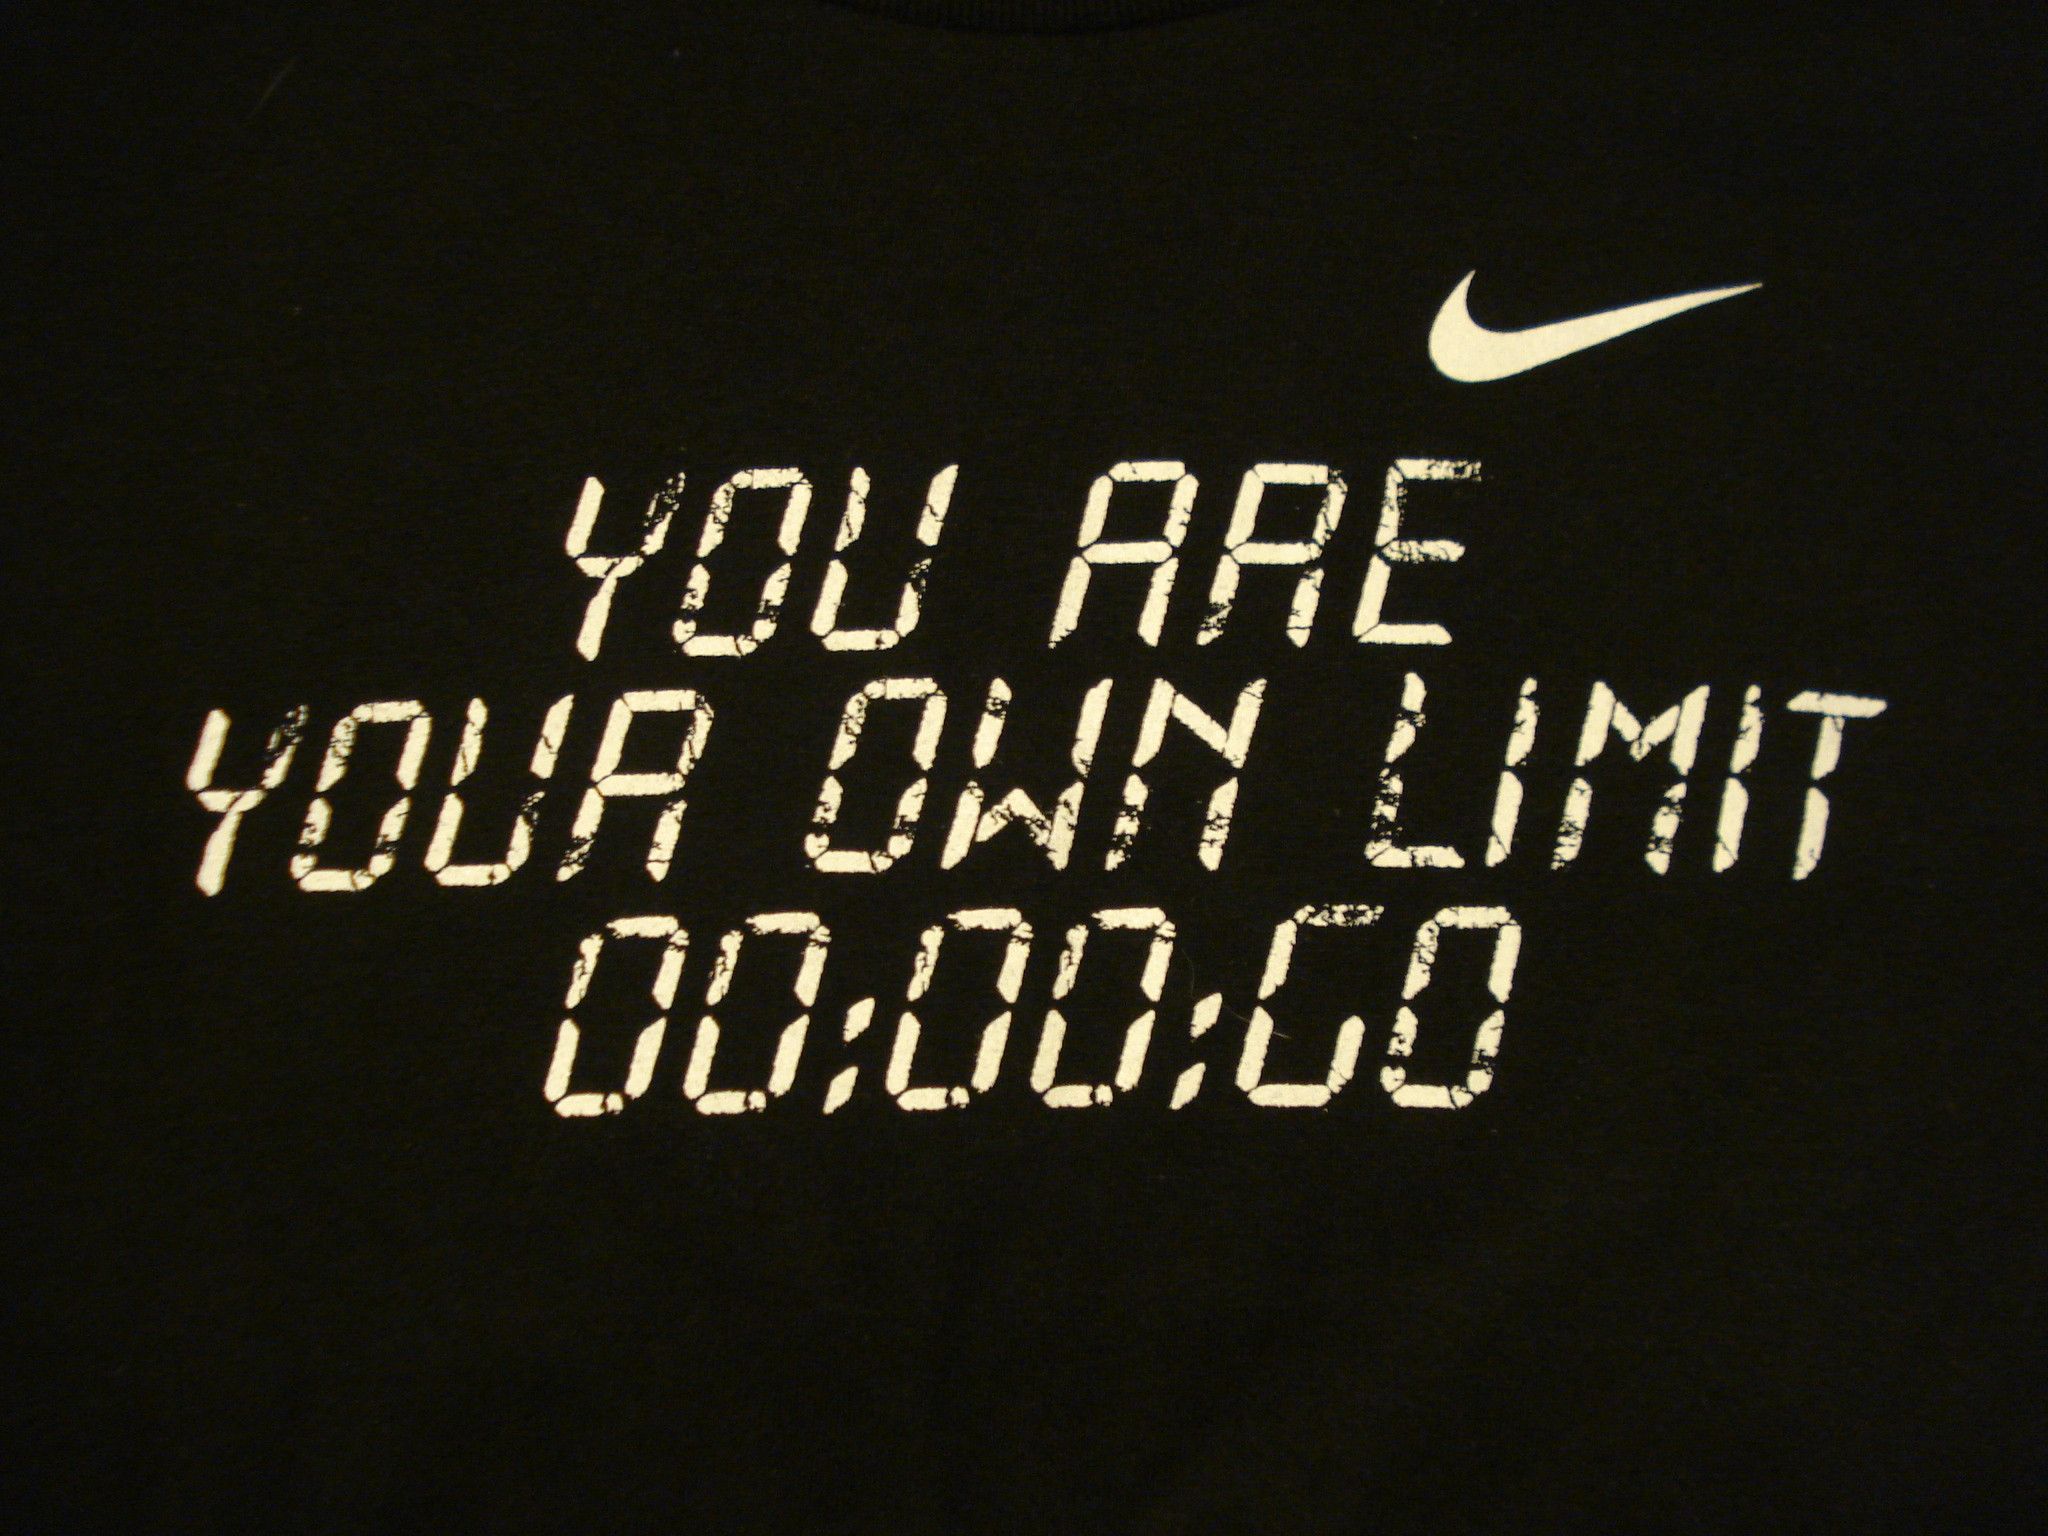 Nike Motivational Quotes Wallpapers on 